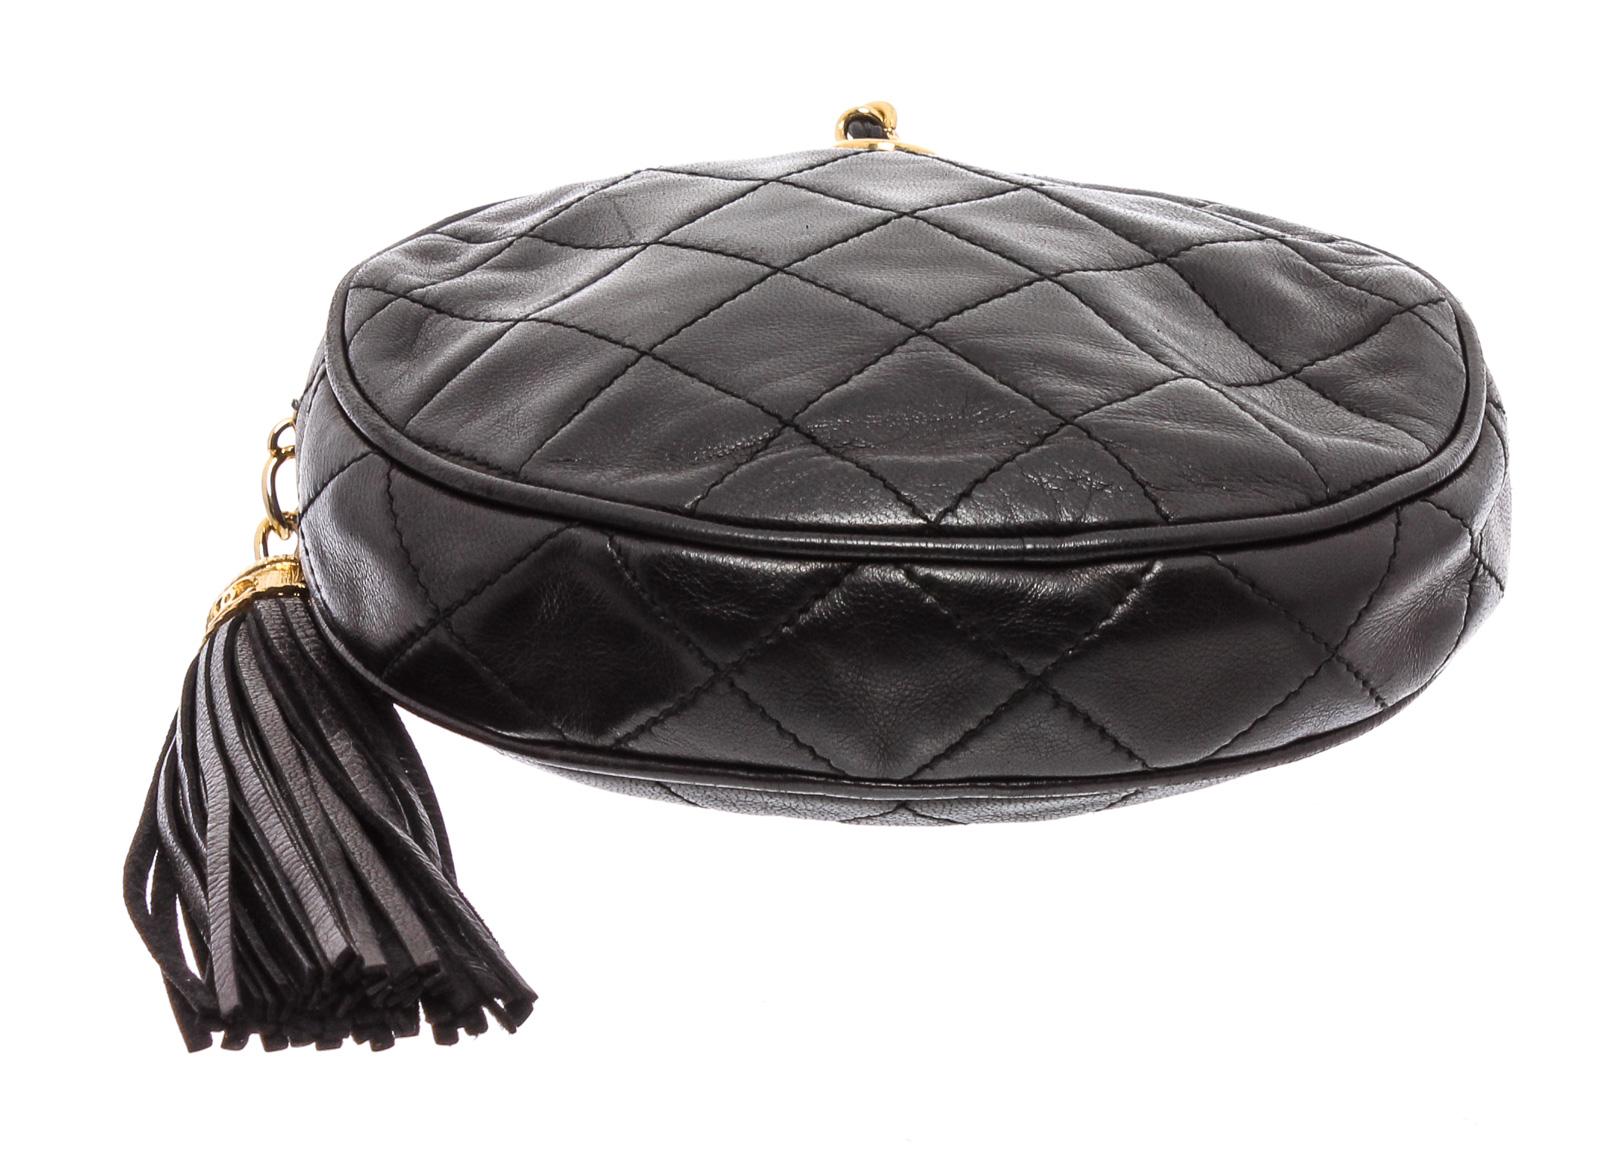 Black quilted lambskin leather Chanel Round clutch bag with fringe tassel zippered closure, gold-tone hardware and chain wrapped wristlet.

21864MSC MLA